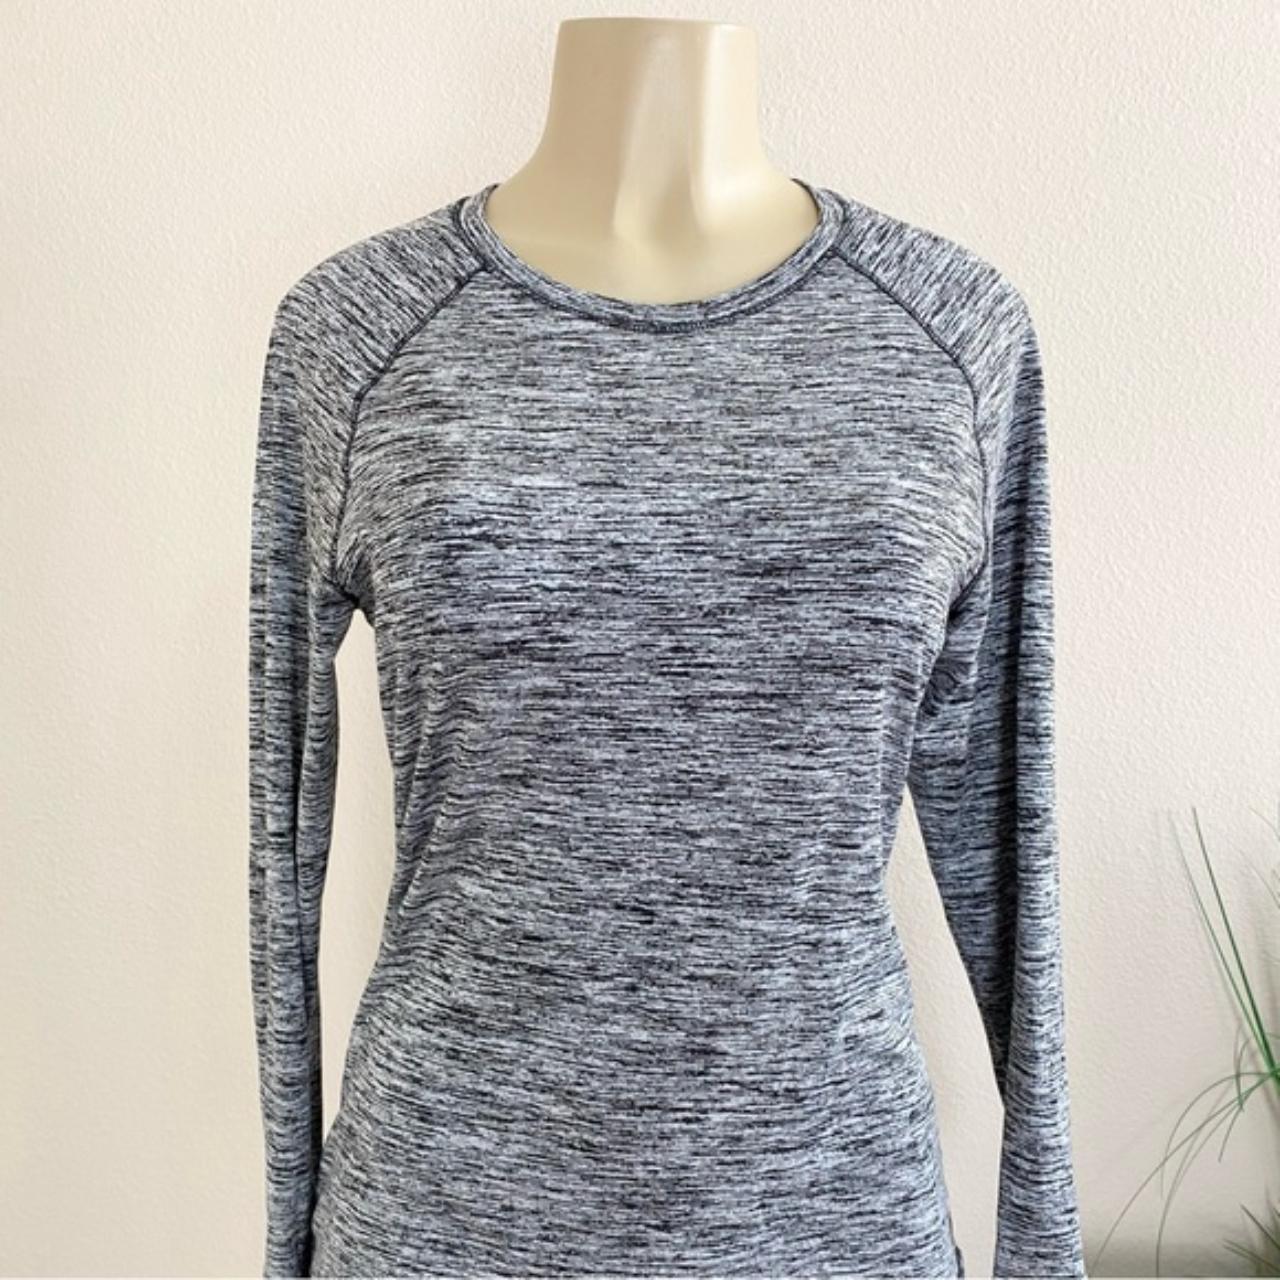 Description: Climate Right by Cuddl Duds Modern Fit - Depop